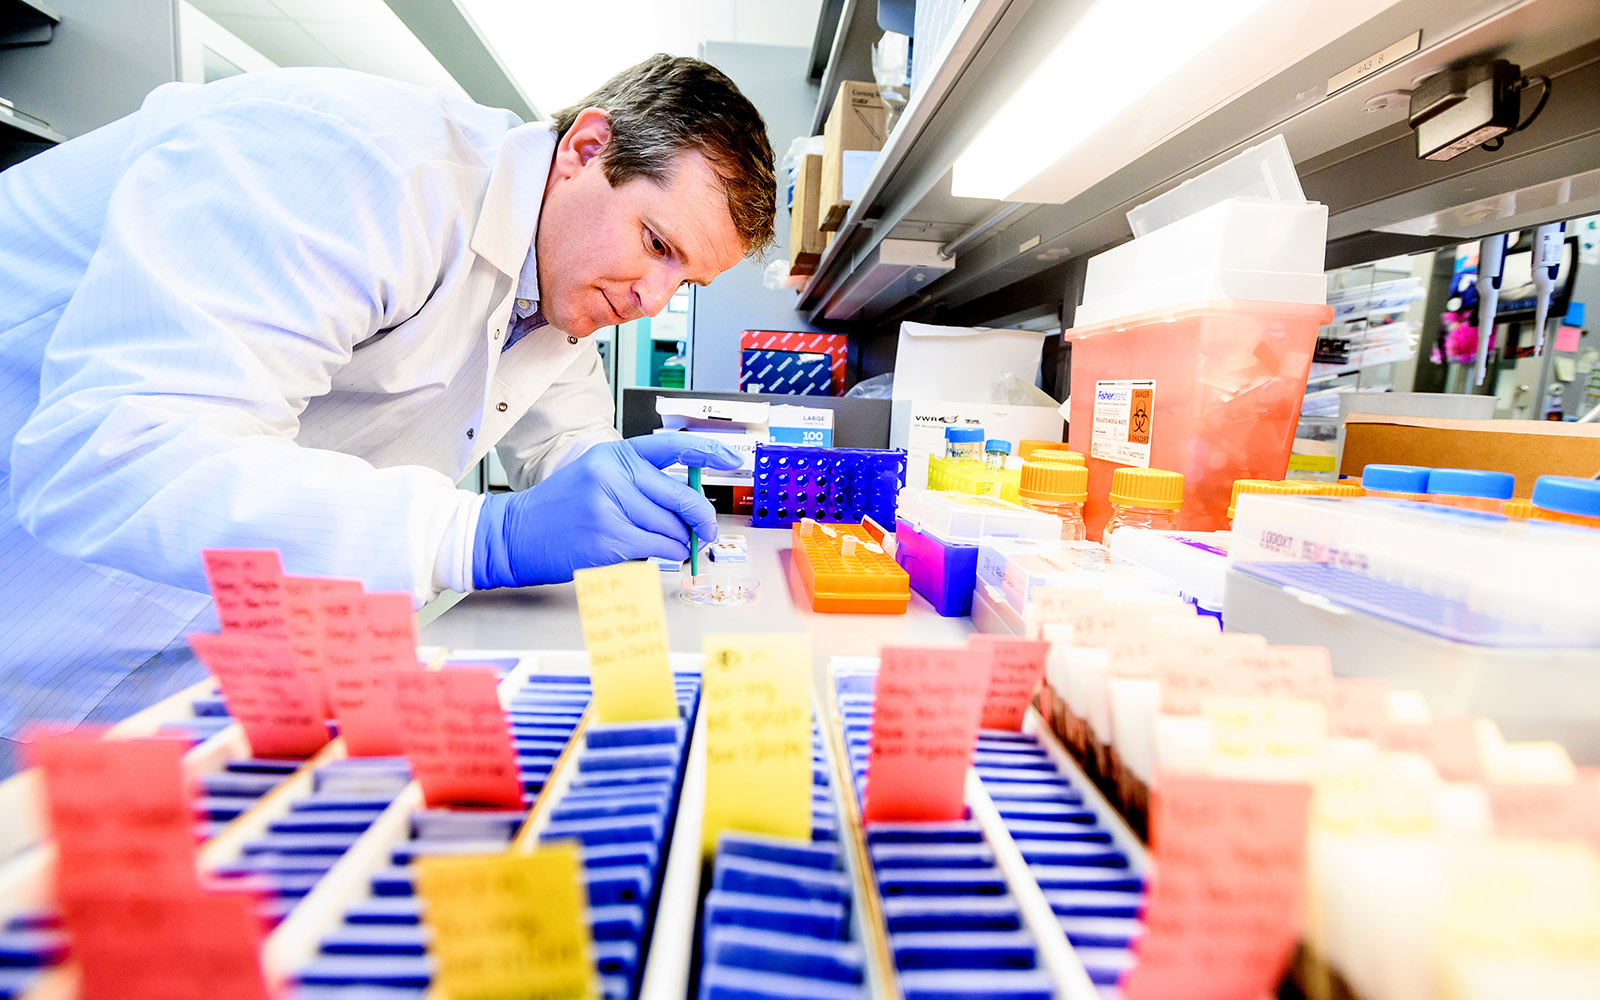 David Solomon, MD, extracts DNA from brain tumor tissue for genomic testing. Image by Noah Berger